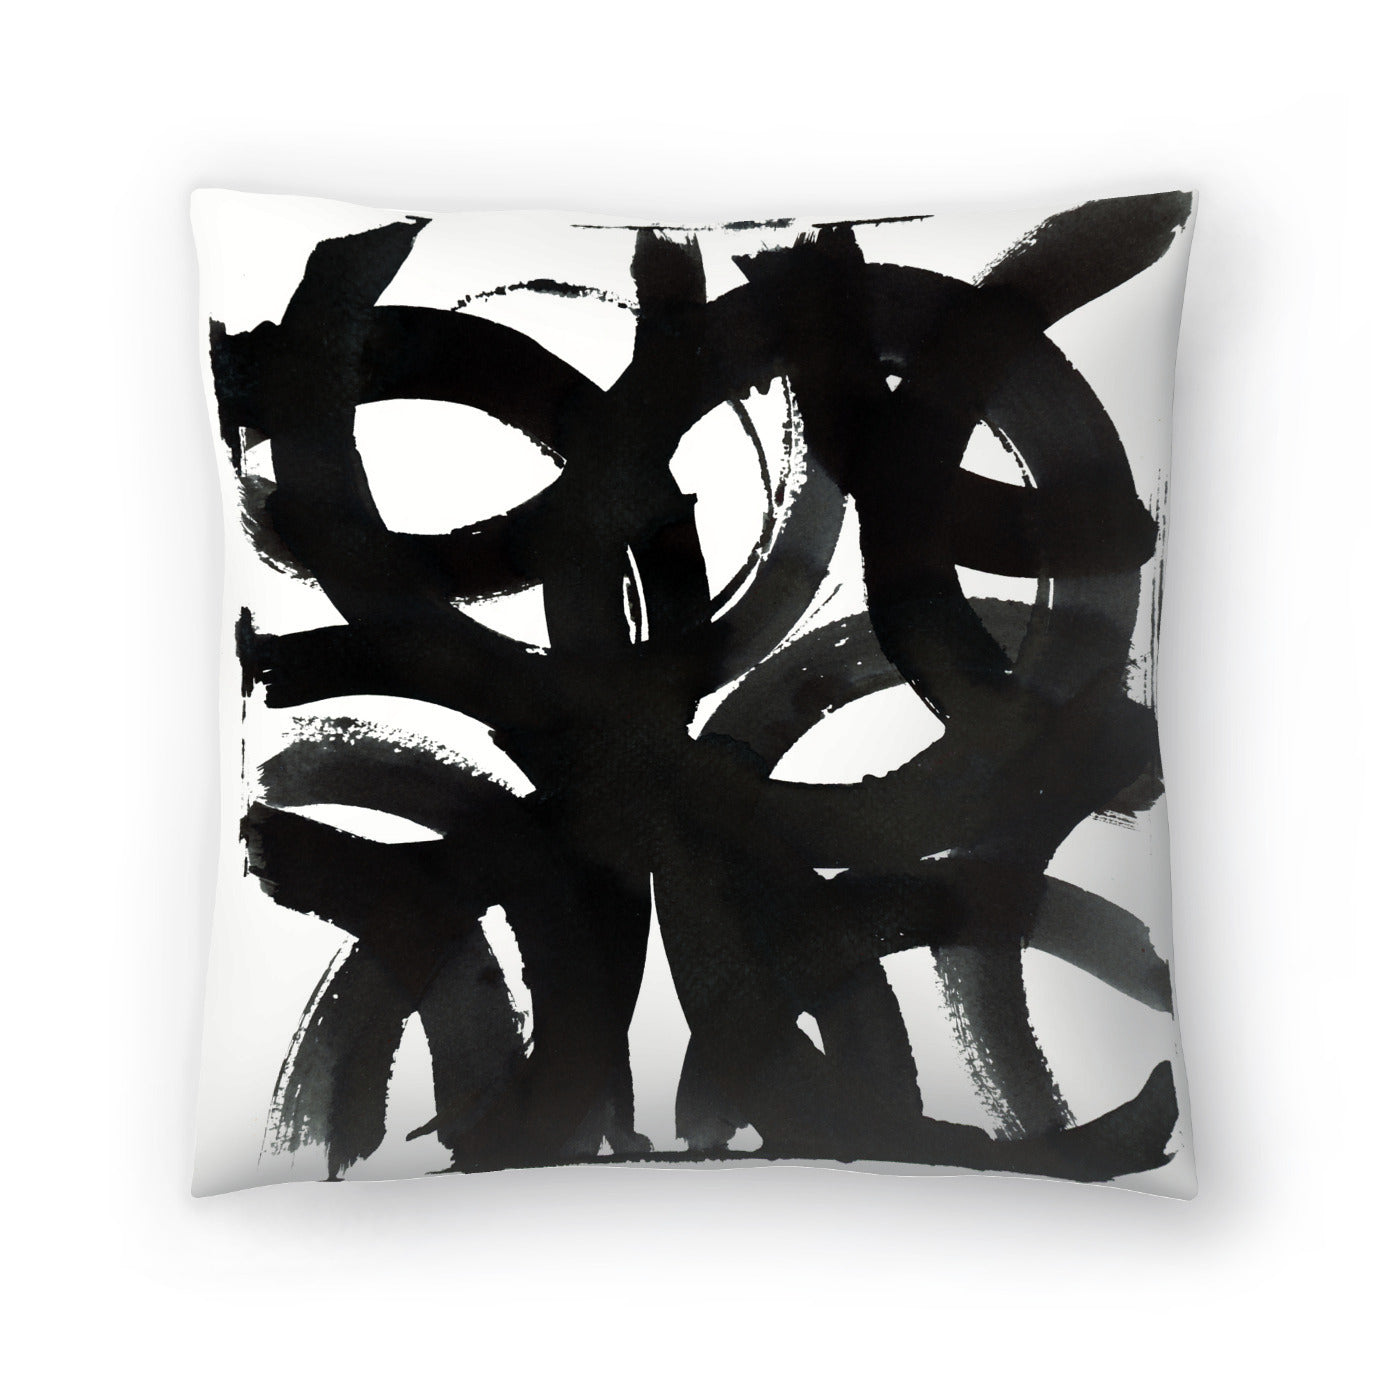 Cue Ii by Cartissi - Pillow, Pillow, 20" X 20"